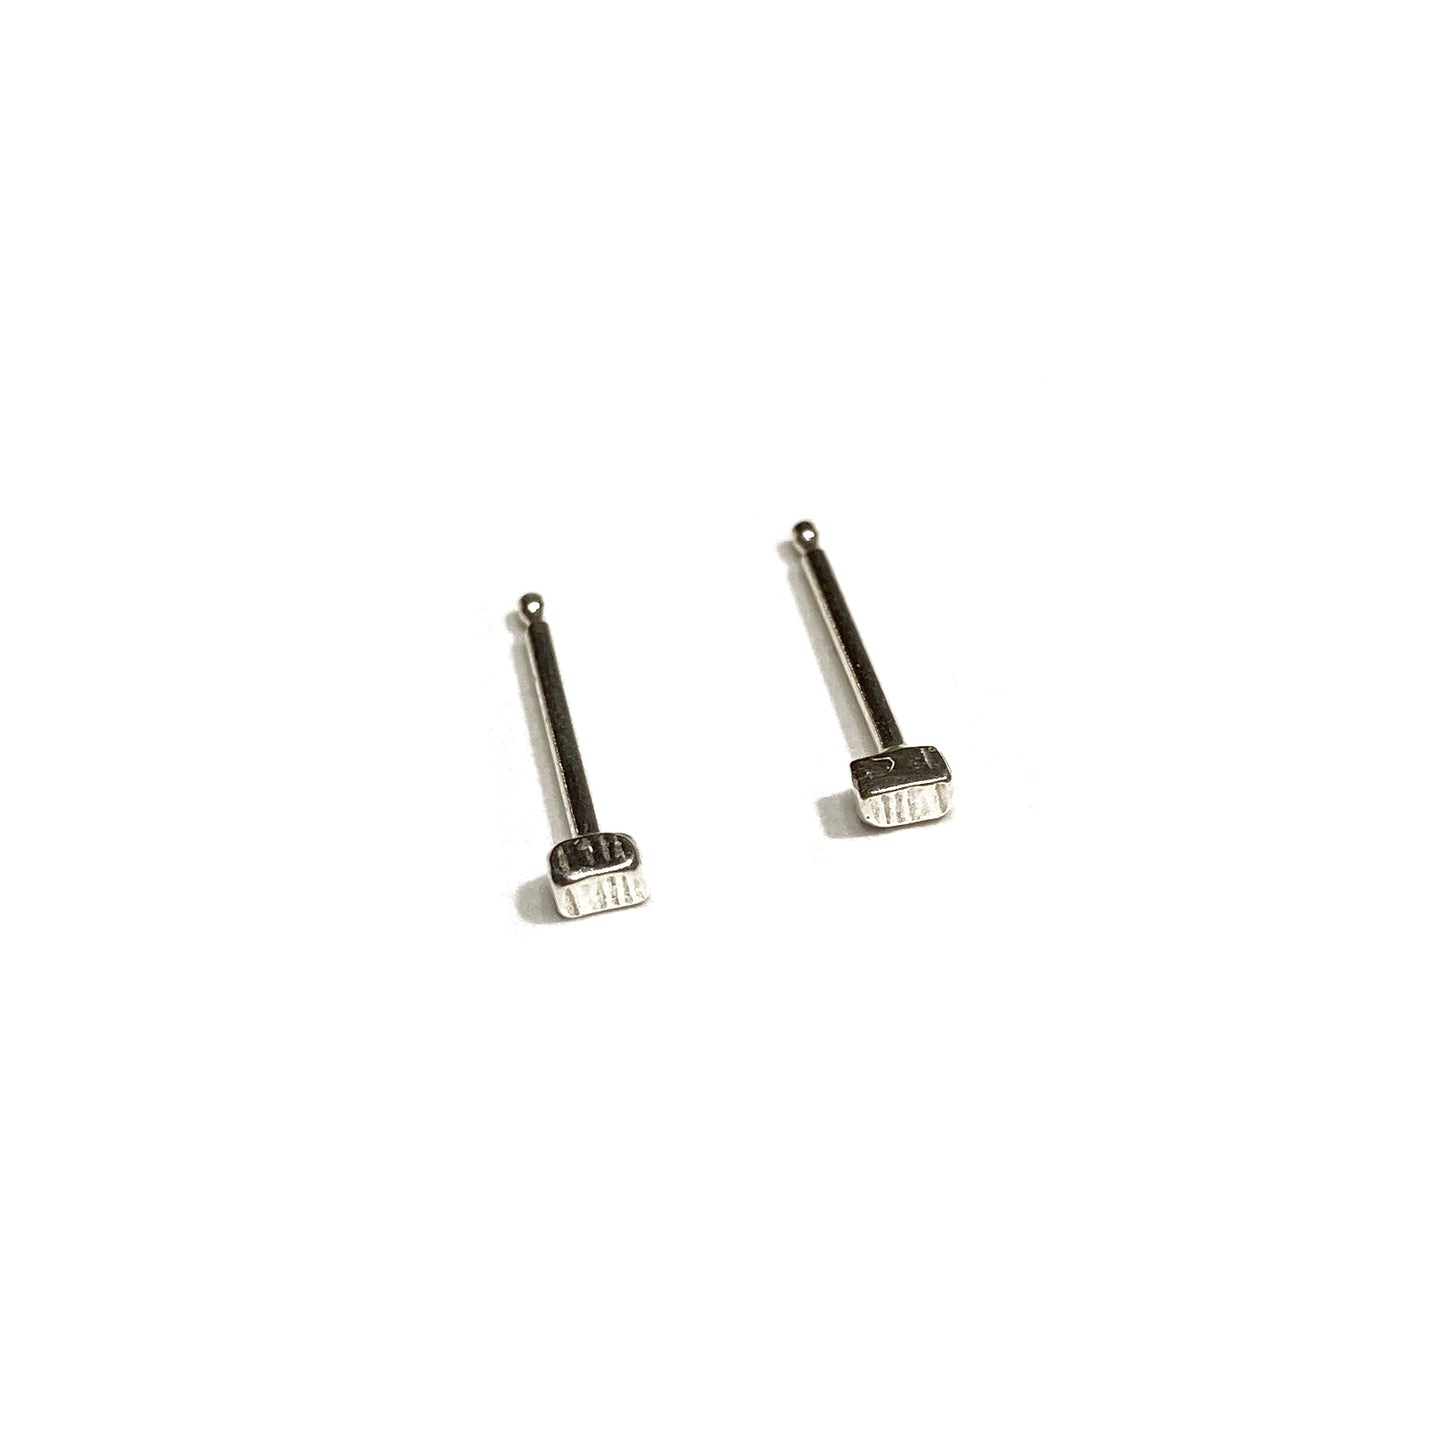 Two tiny silver textured stud earrings and posts angled on a white background